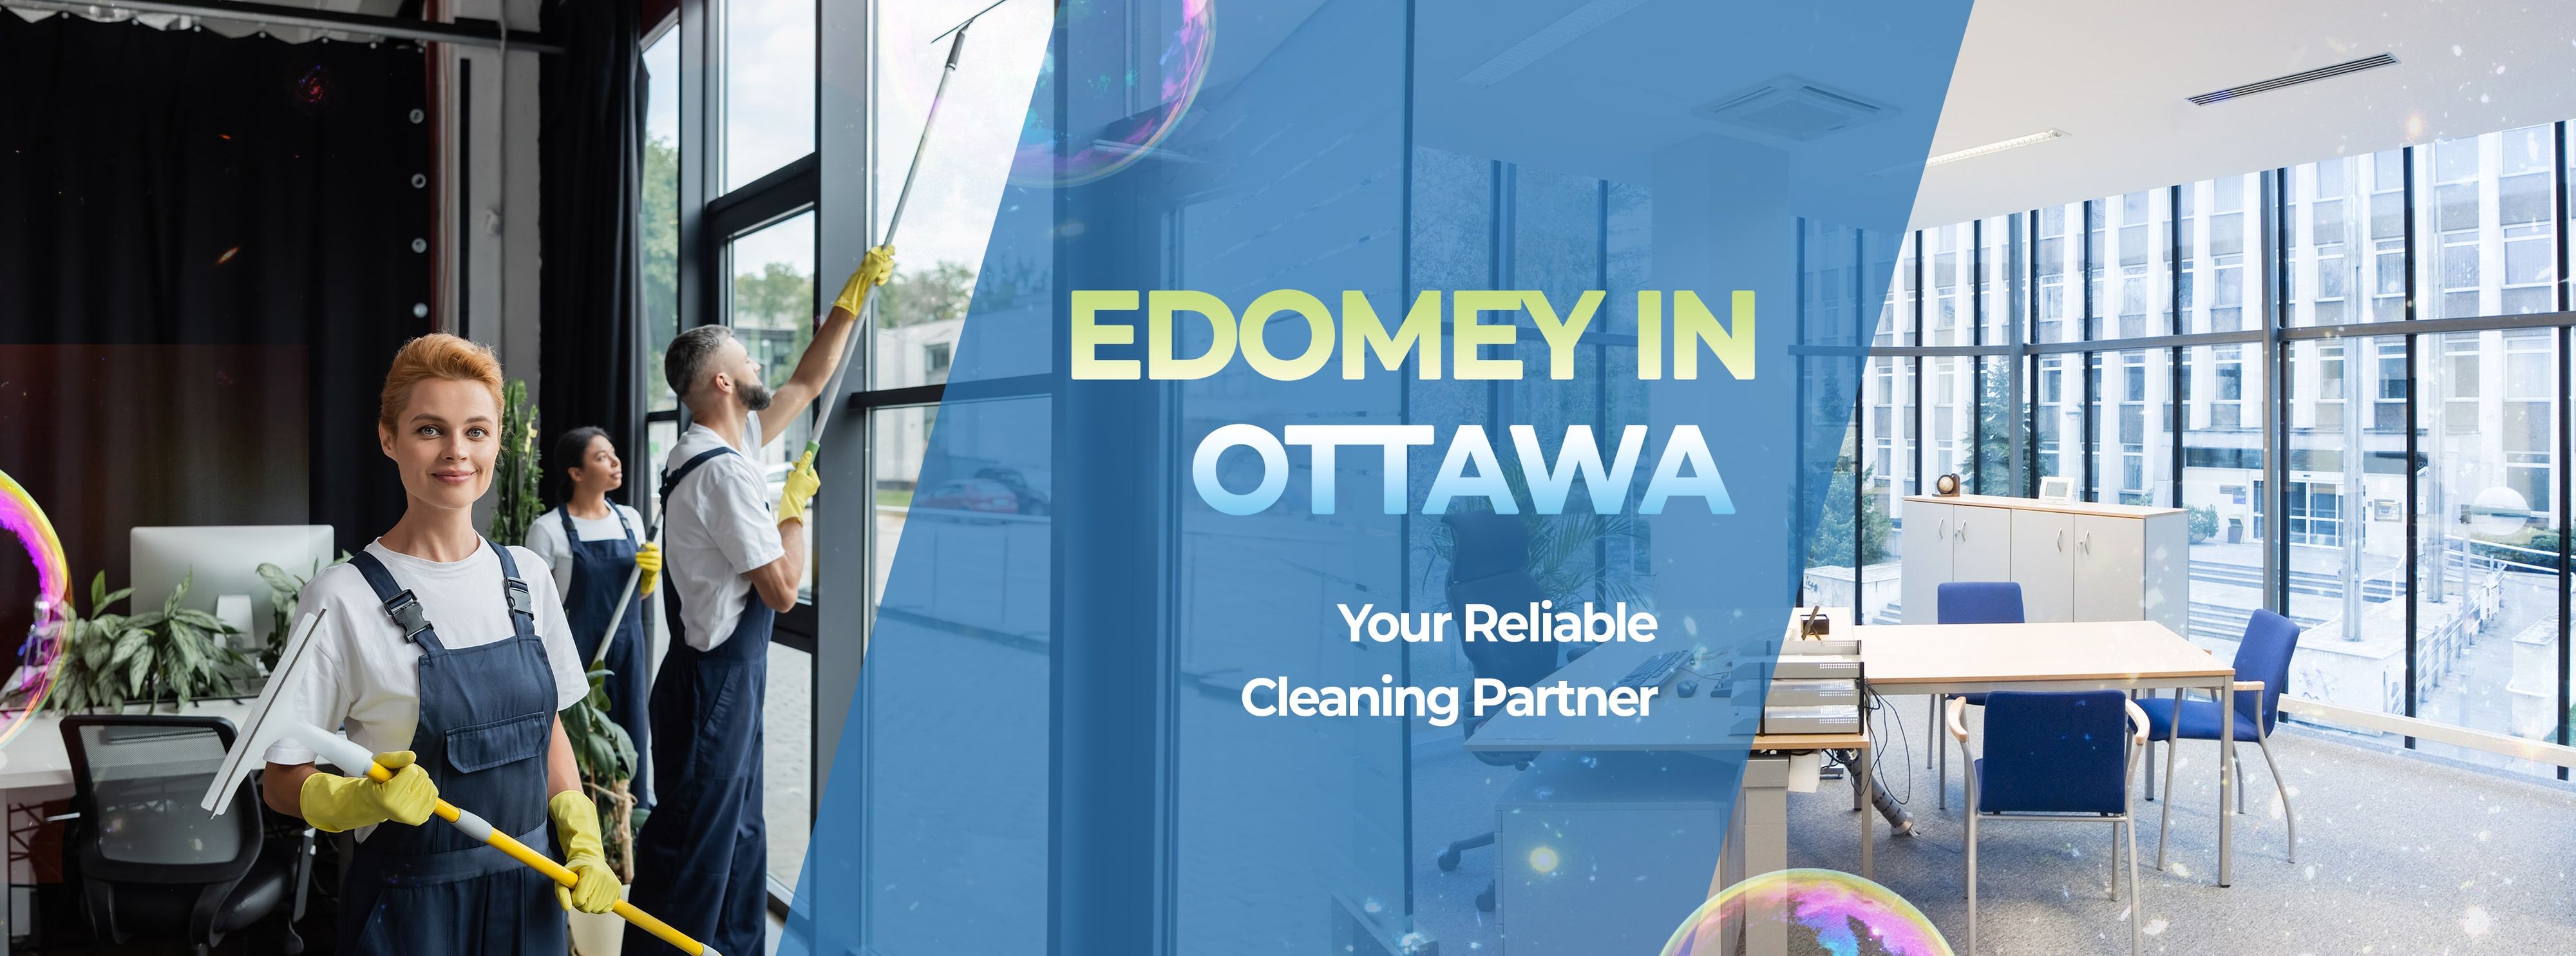 Commercial Cleaning Services in Ottawa by professional cleaning company Edomey